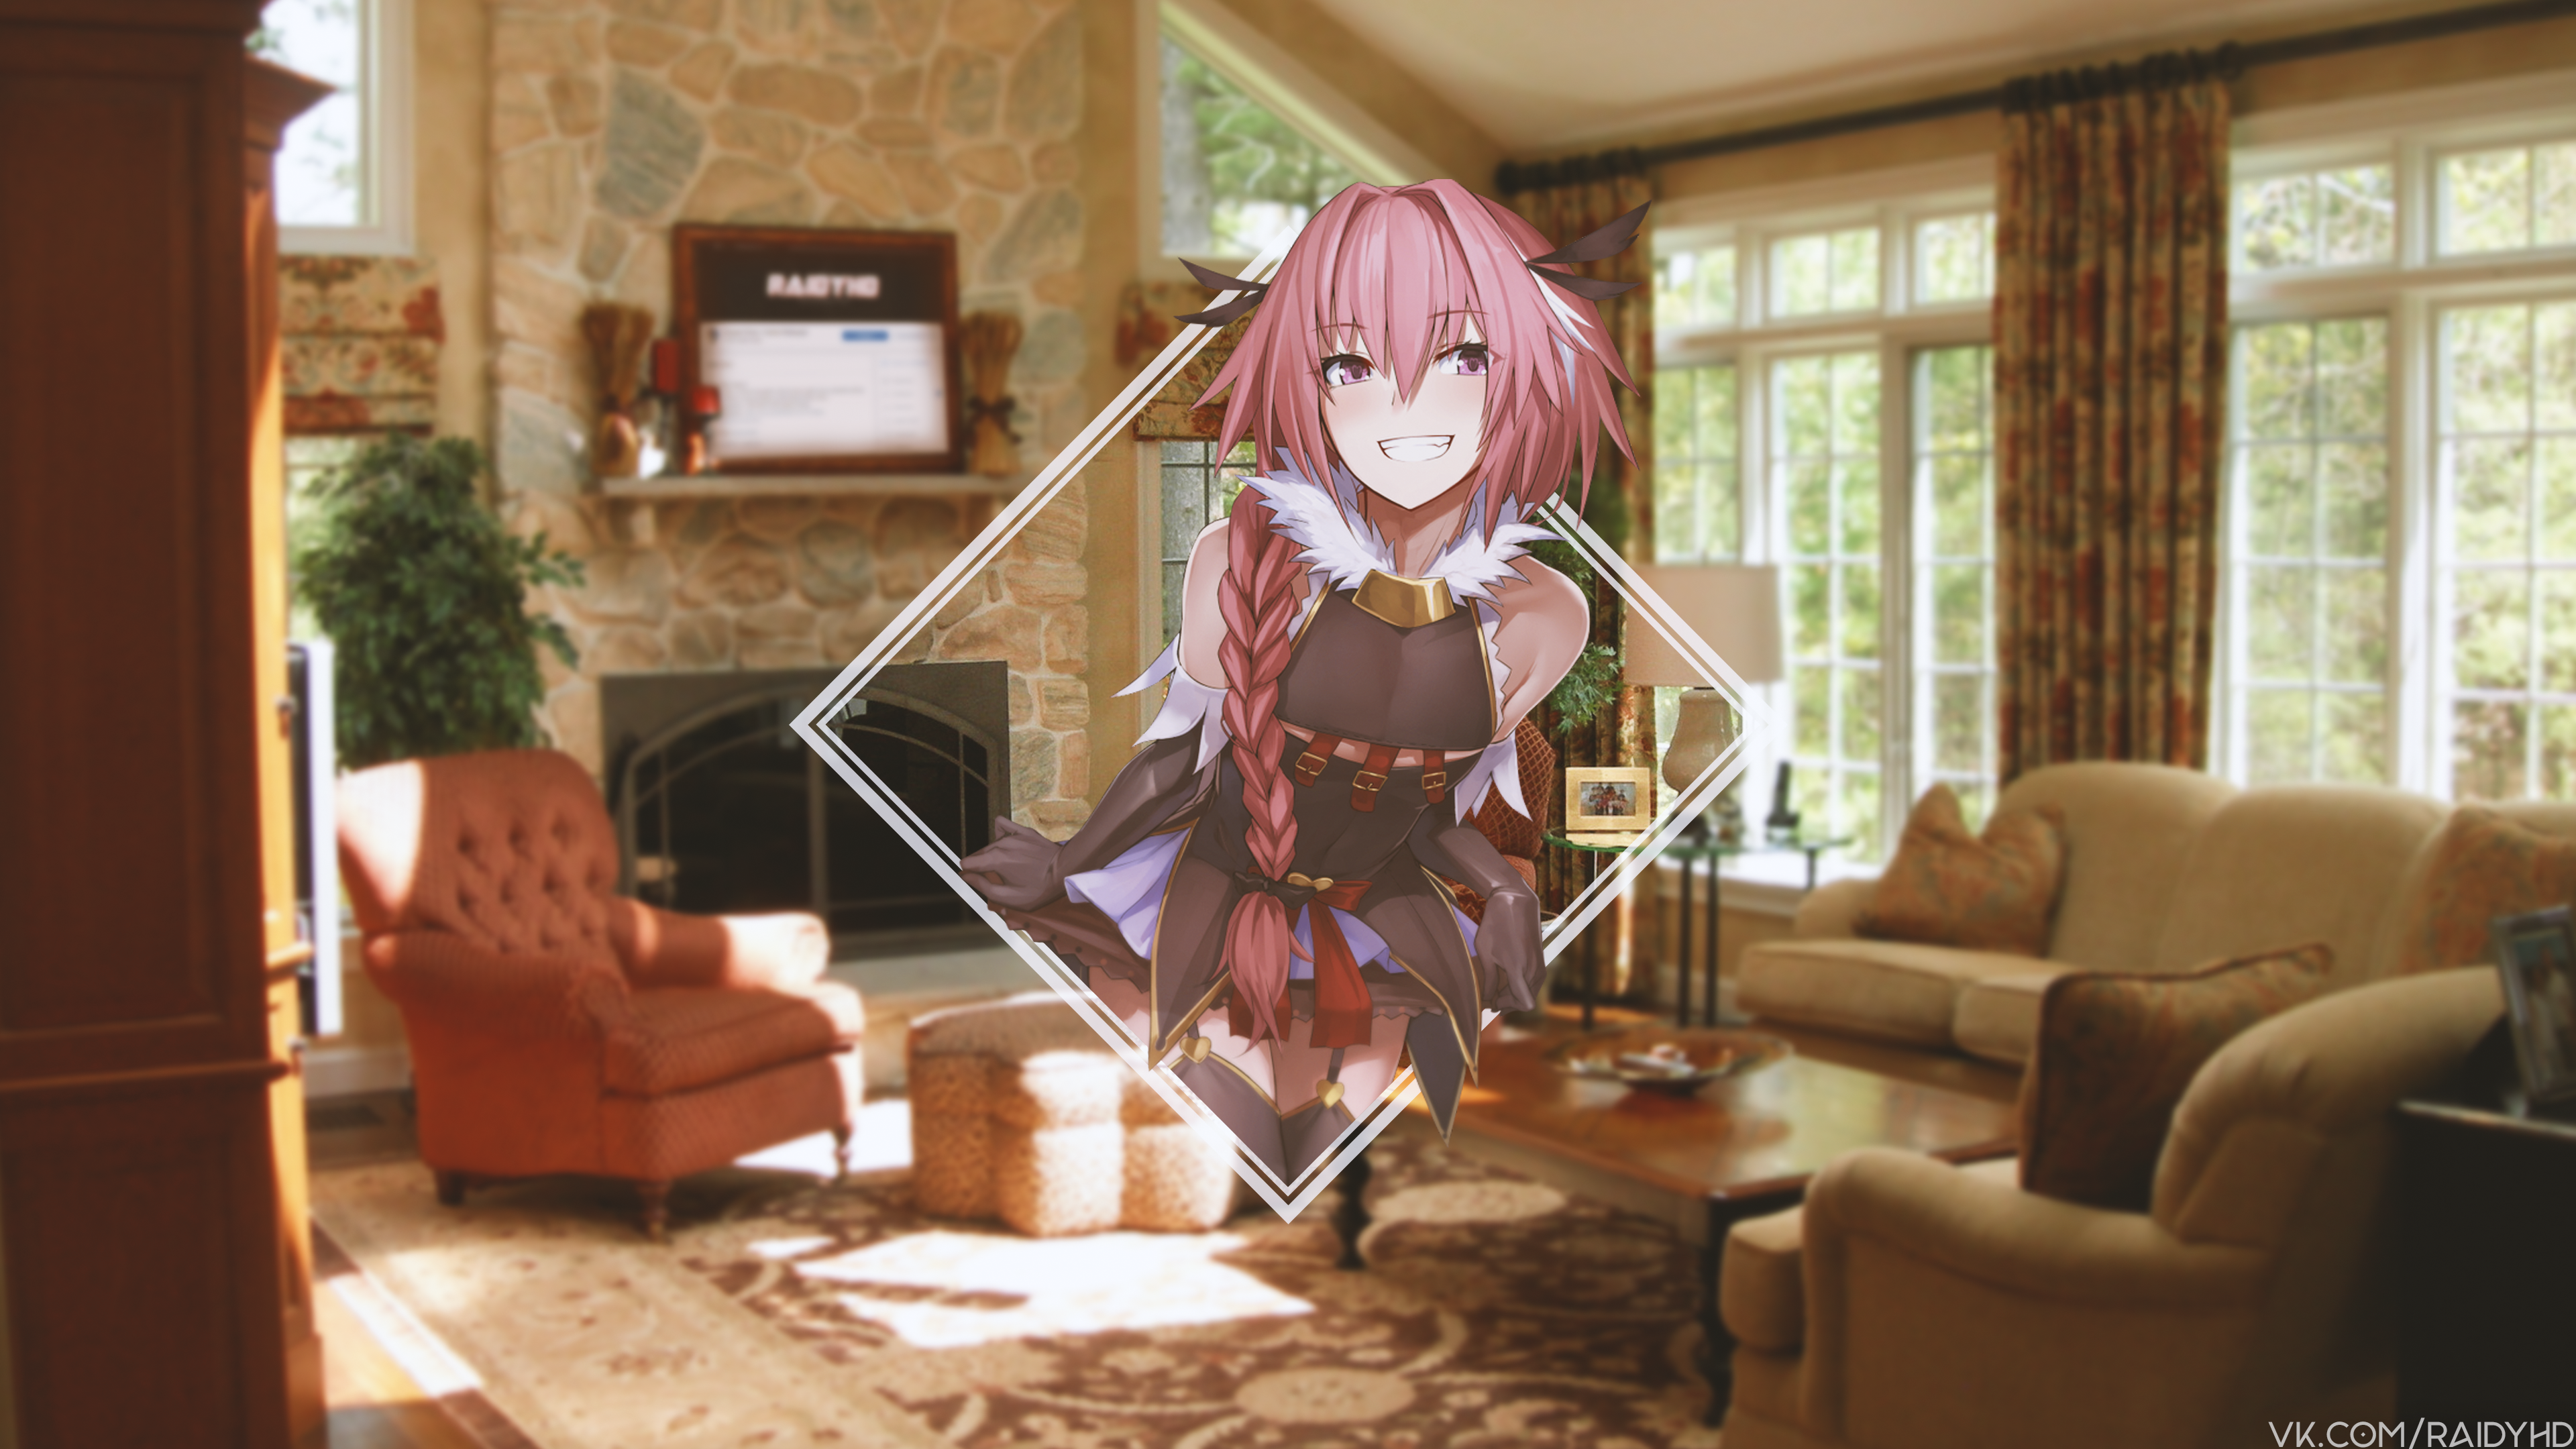 Anime Anime Boys Picture In Picture Fate Grand Order FGO Astolfo Astolfo Fate Apocrypha Rider Of Bla 3840x2160